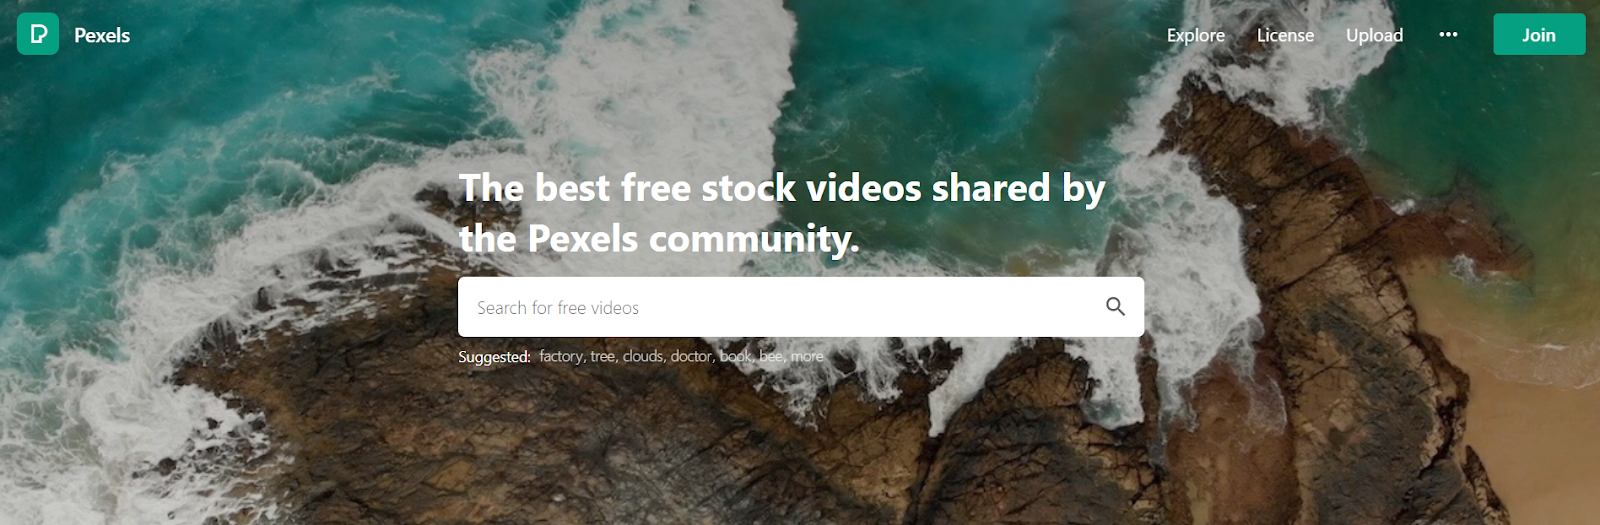 pexels website is one of the best for free stock video